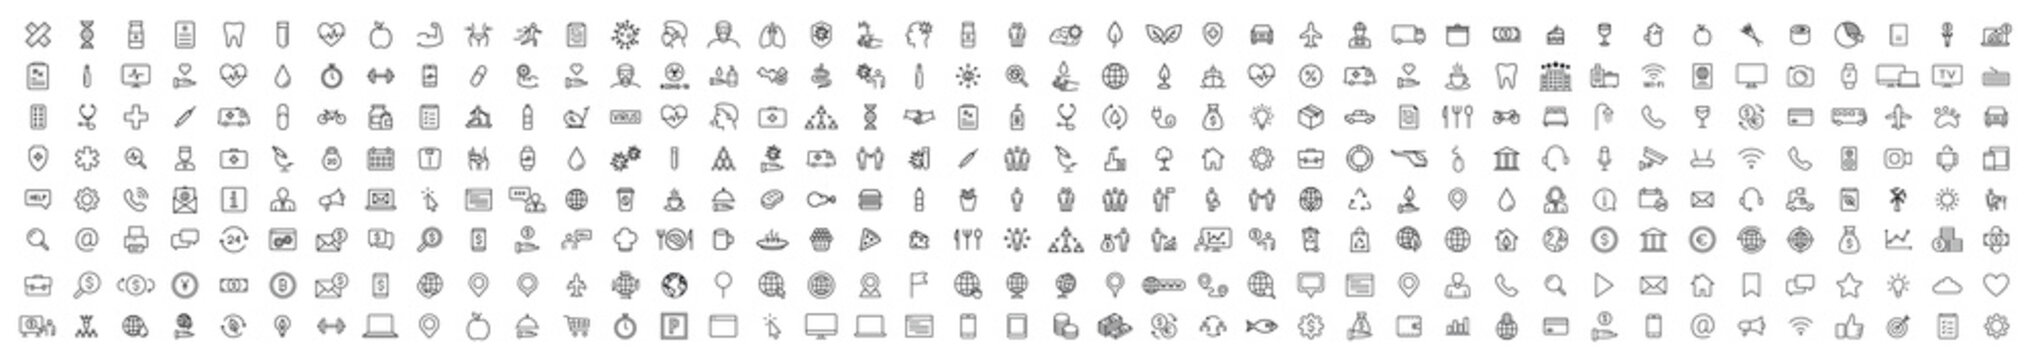 Set of 330 Medical and Health web icons in line style. Medicine and Health Care, RX, infographic. Vector illustration.